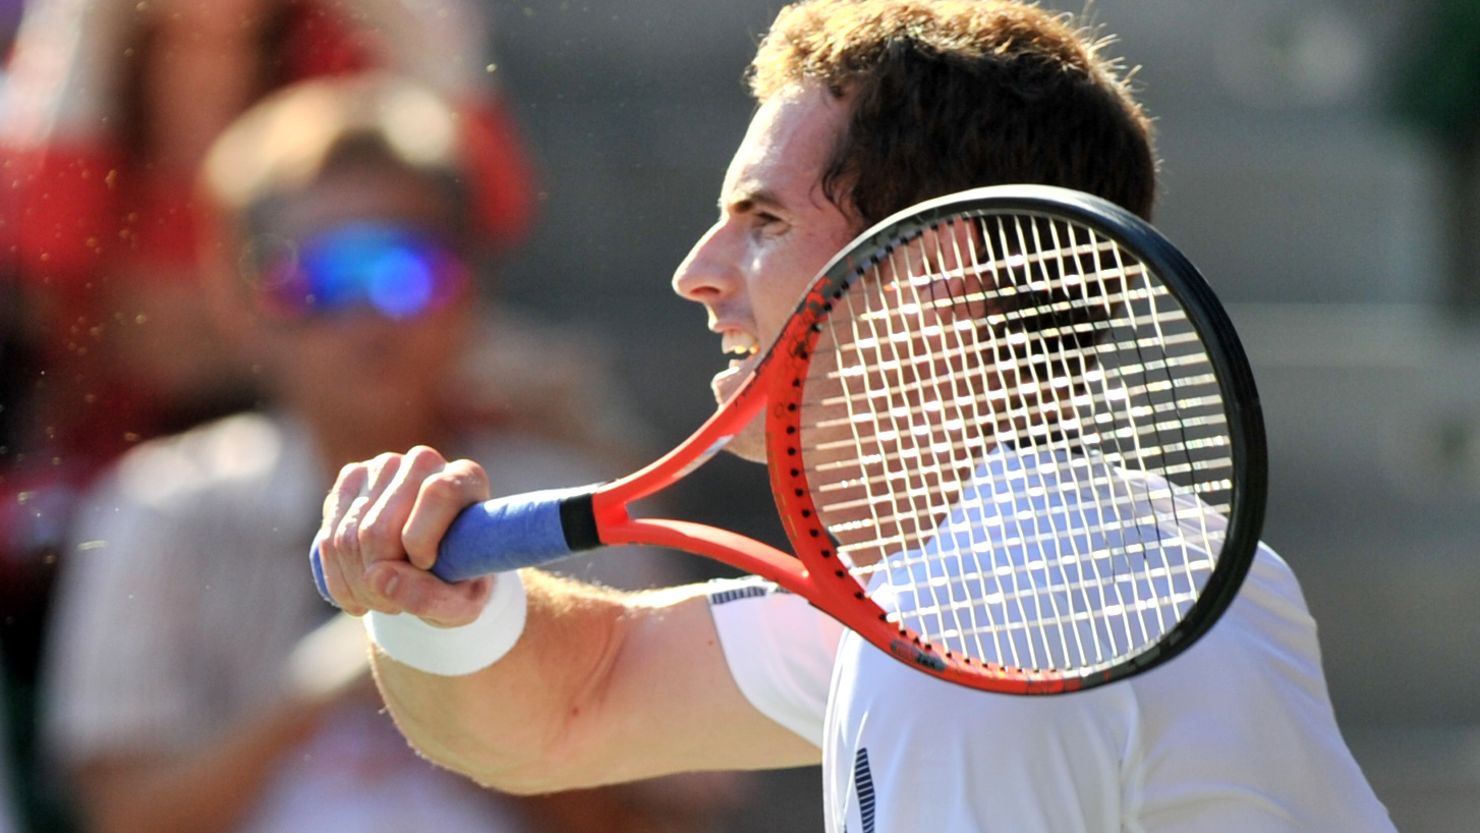 Andy Murray strikes a forehand during his three set win over Stanislas Wawrinka in Tokyo.